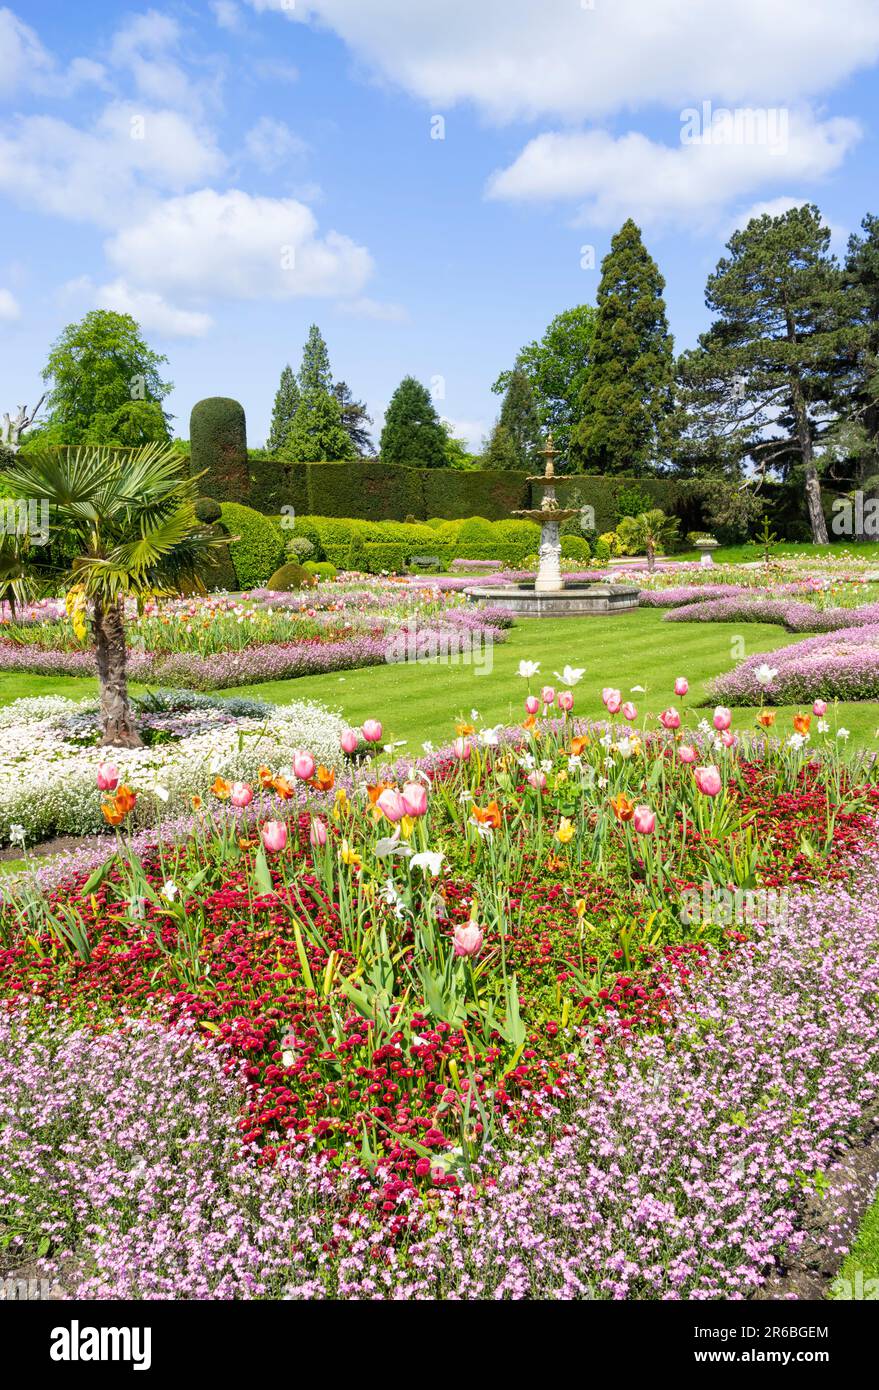 Brodsworth Hall and Gardens Formal gardens or Parterre at Brodsworth hall near Doncaster South Yorkshire England UK GB Europe Stock Photo